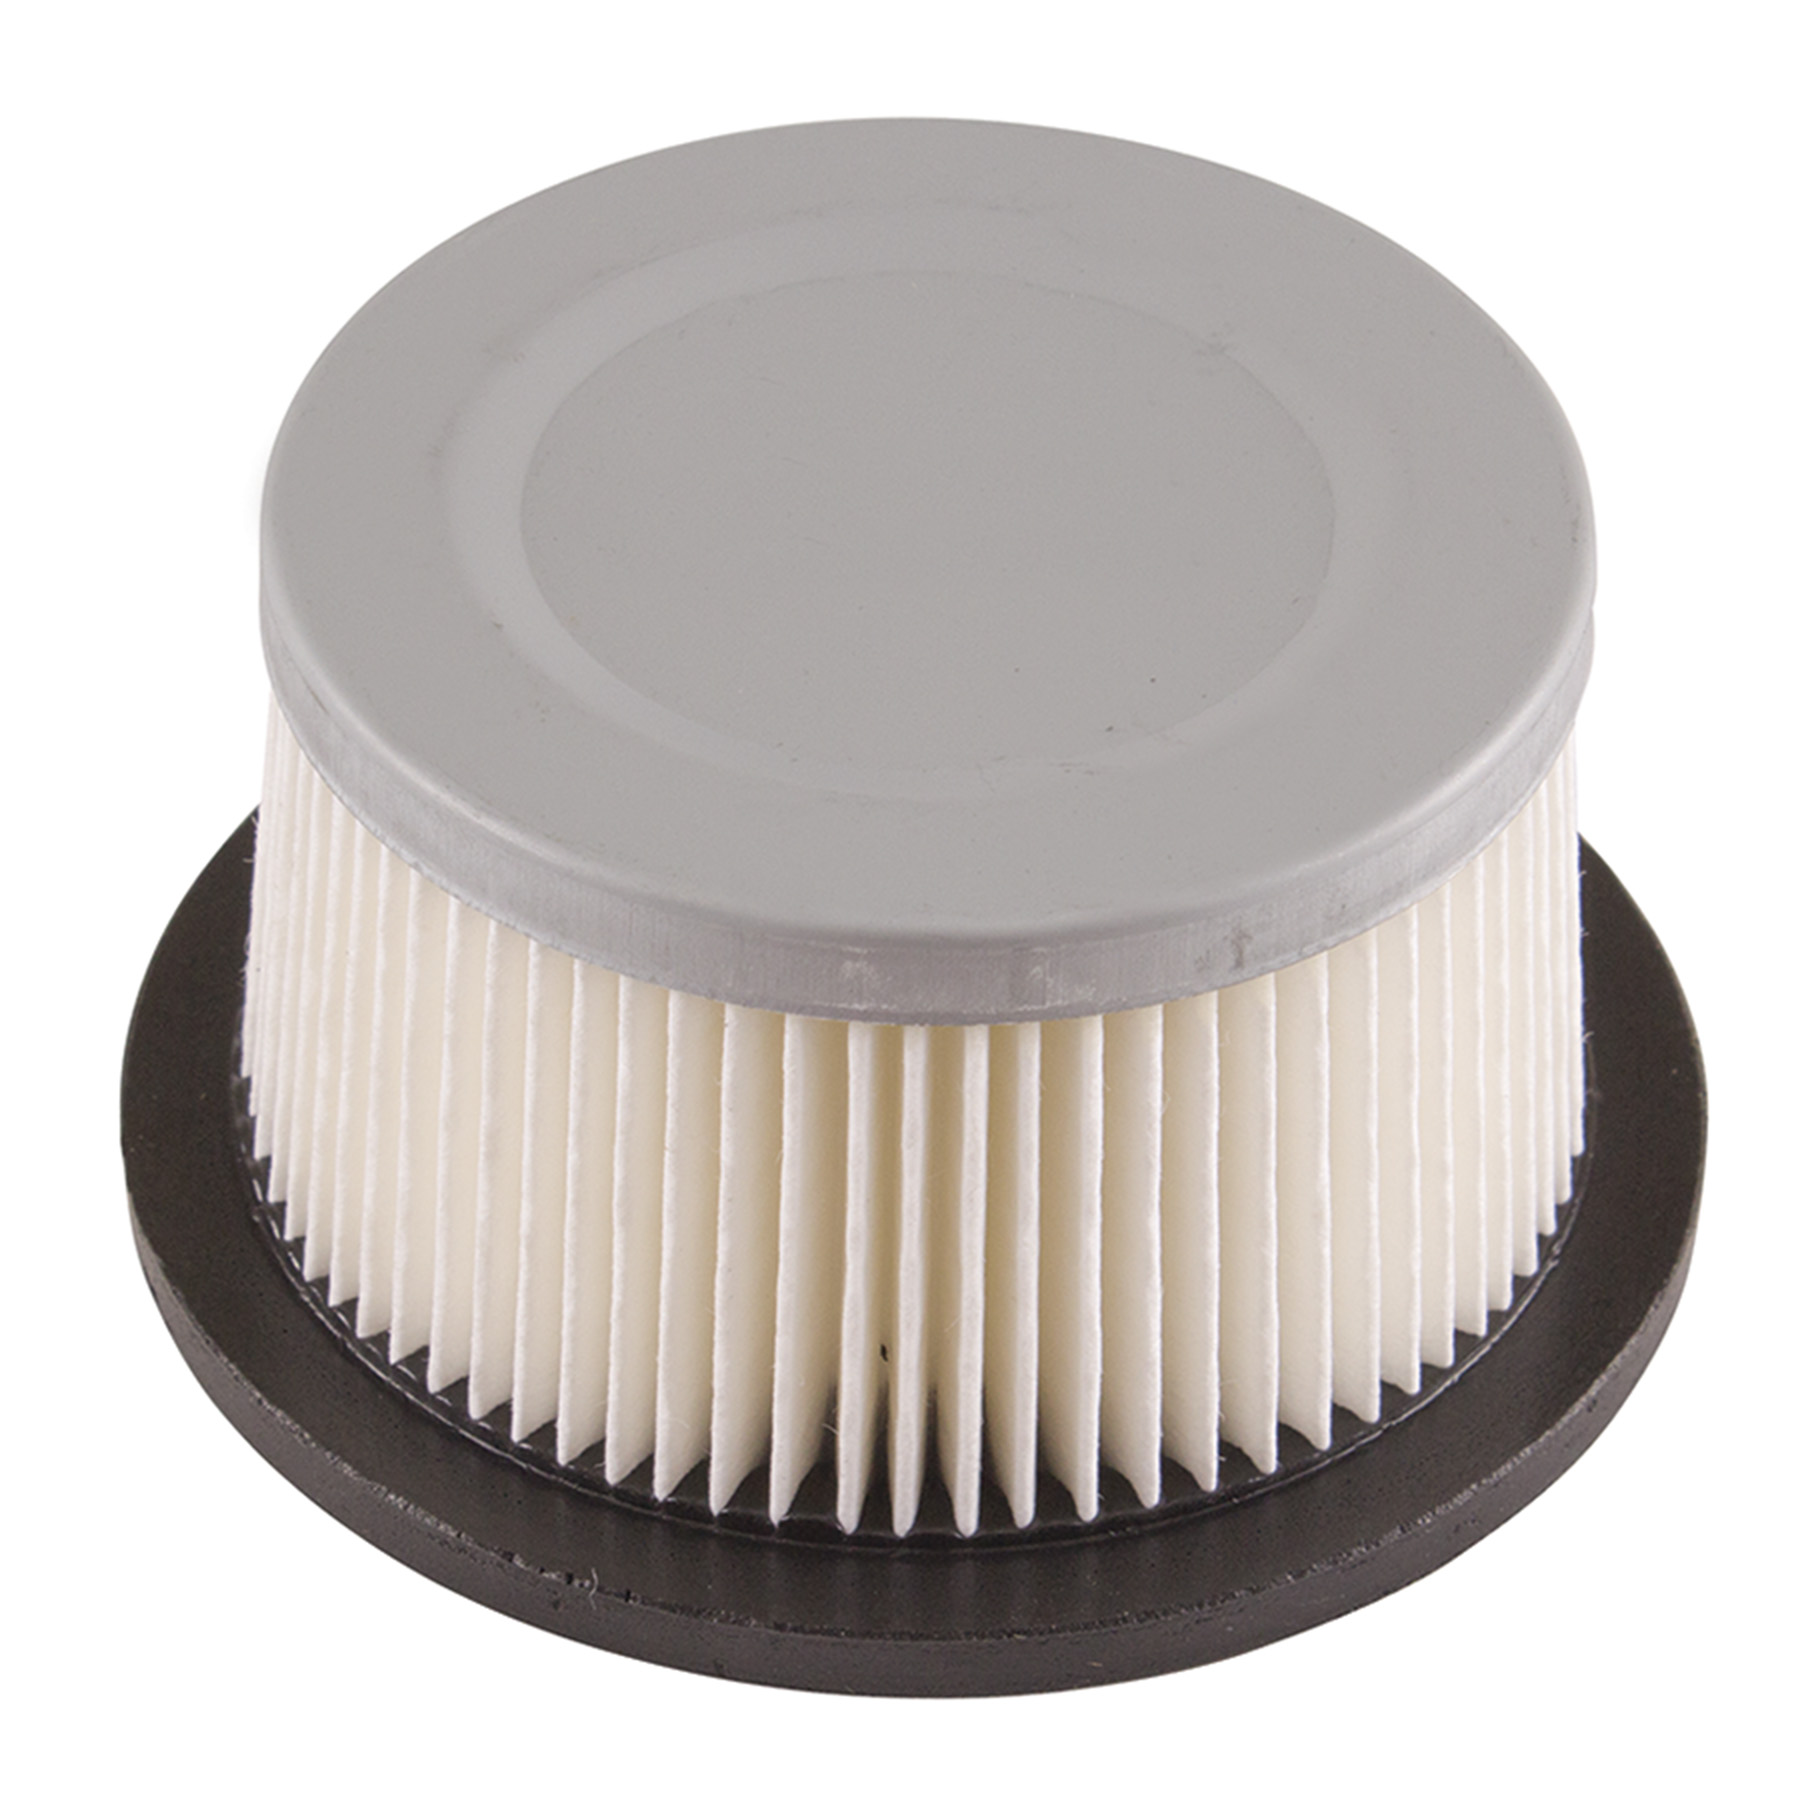 UPC 023899000029 product image for 100-008 Air Filter | upcitemdb.com